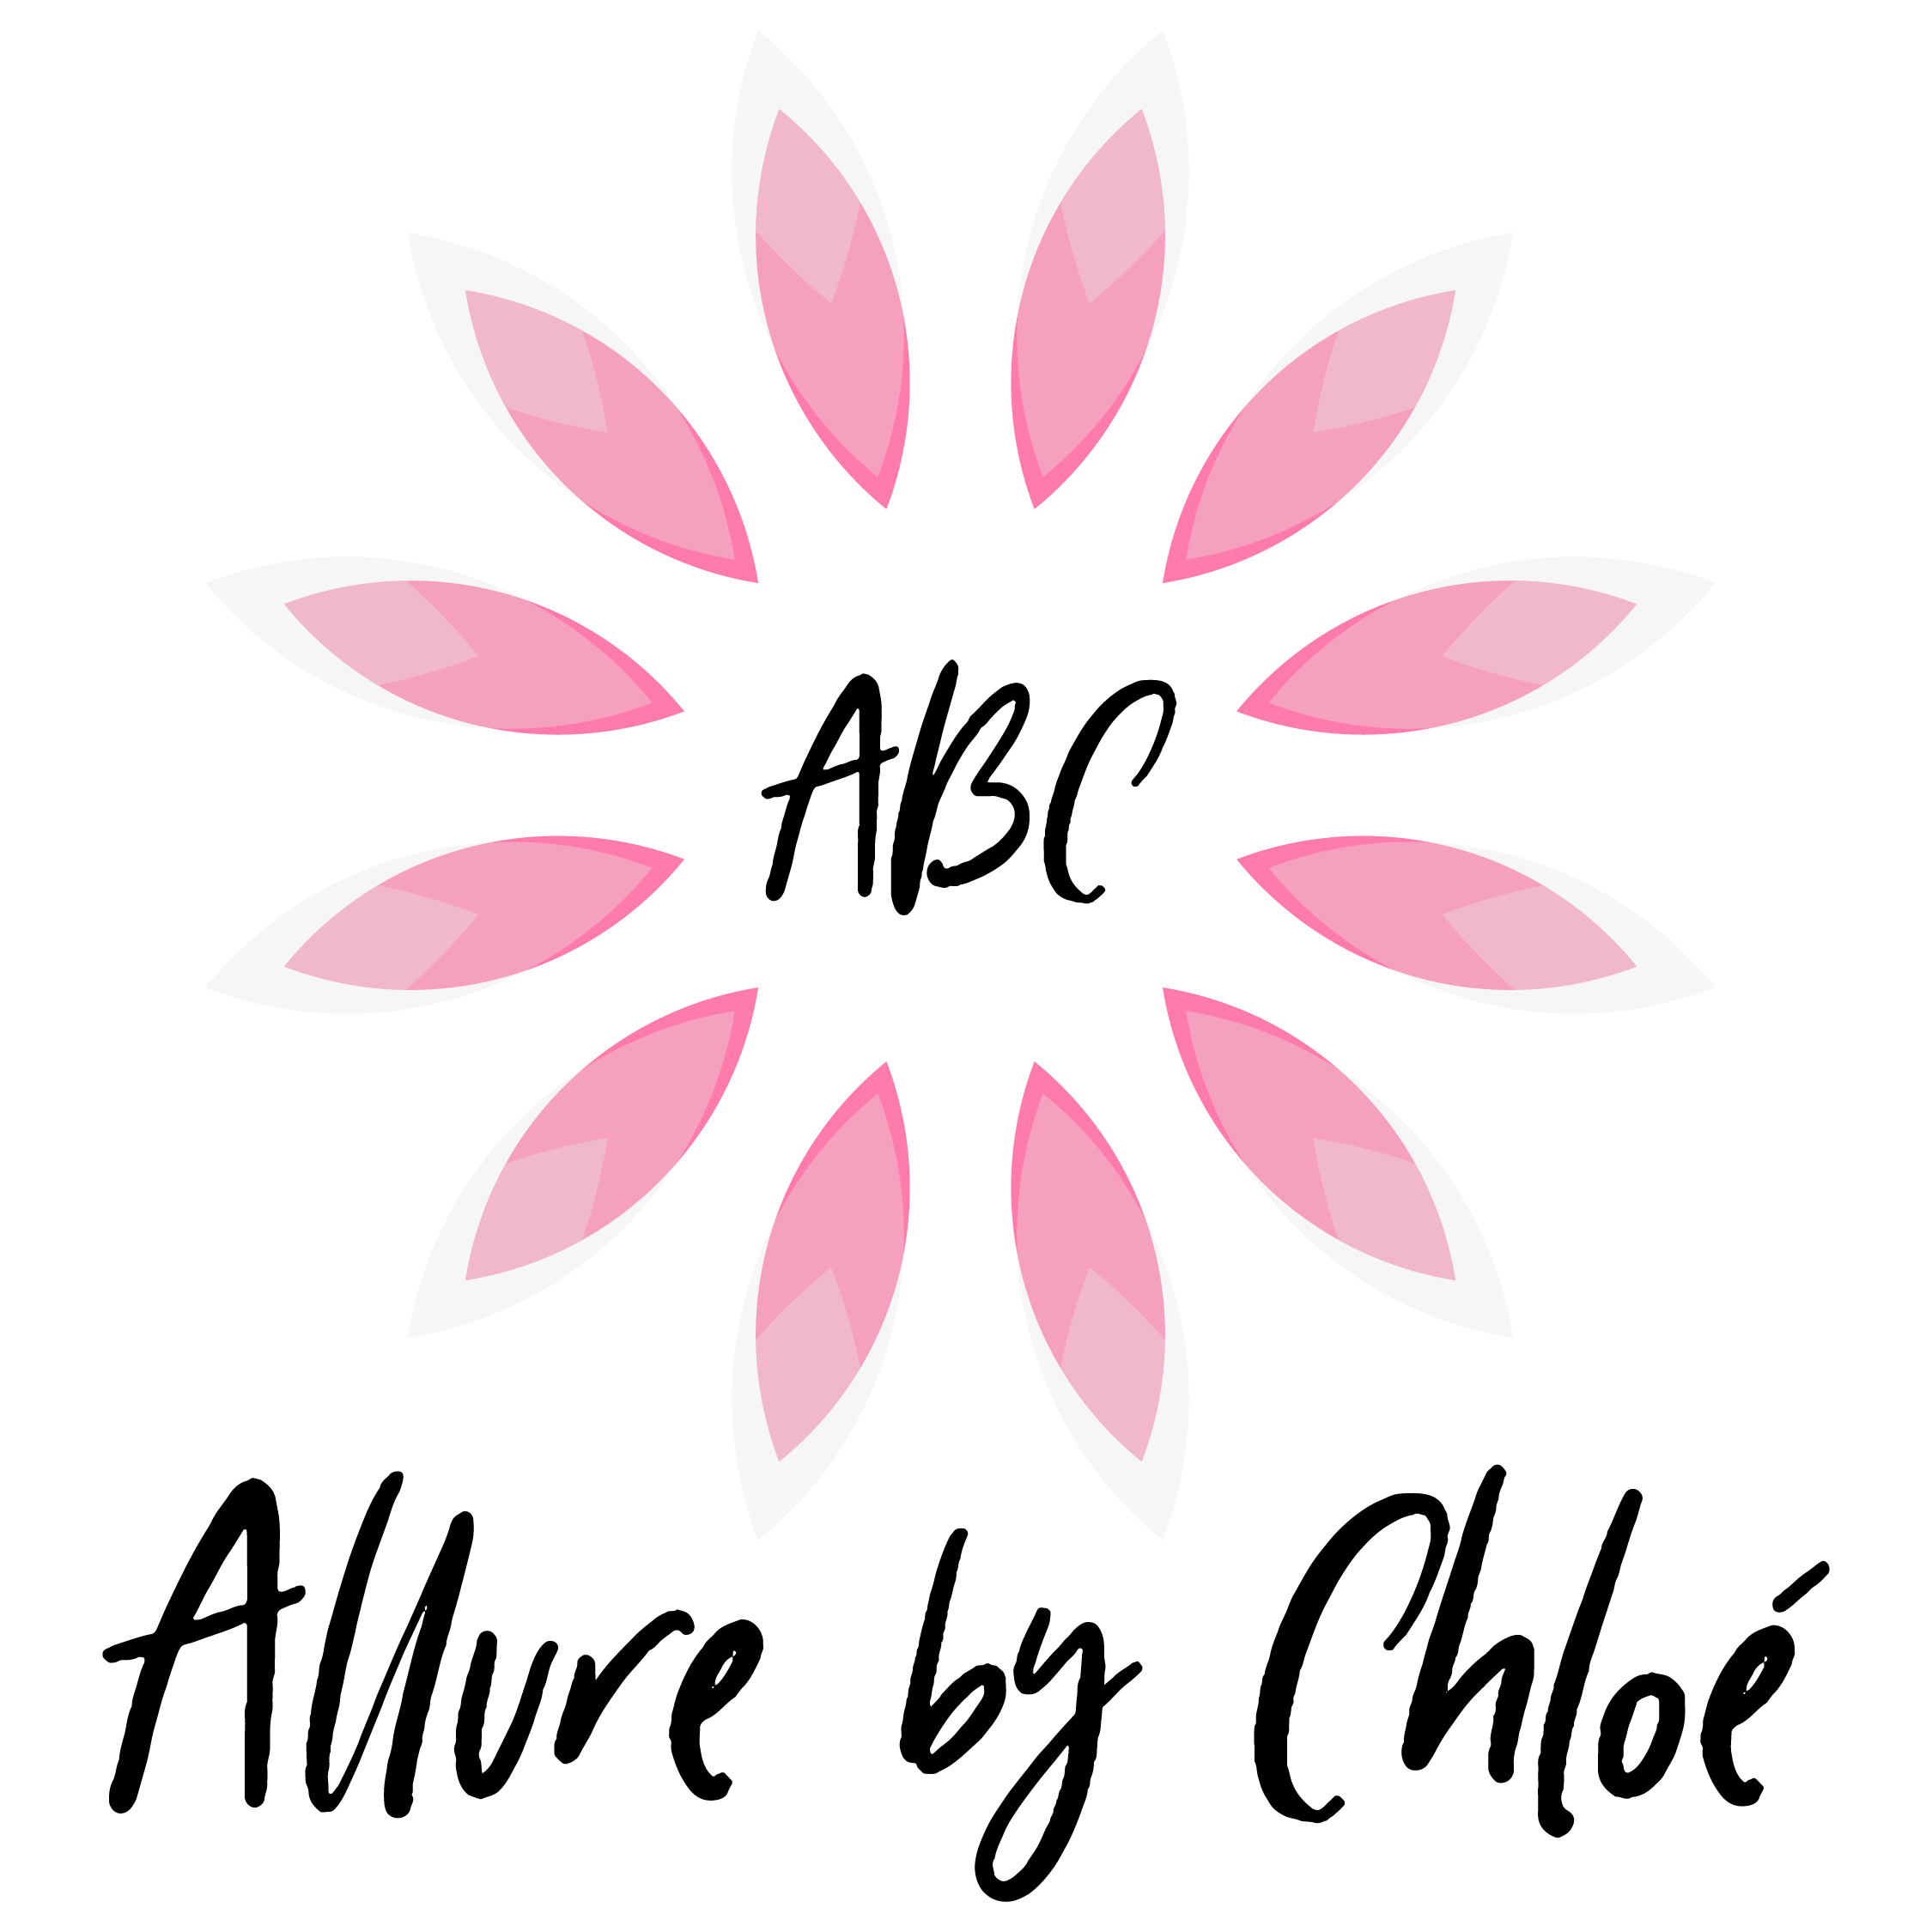 Makeup Products Logo - Allure By Chloé